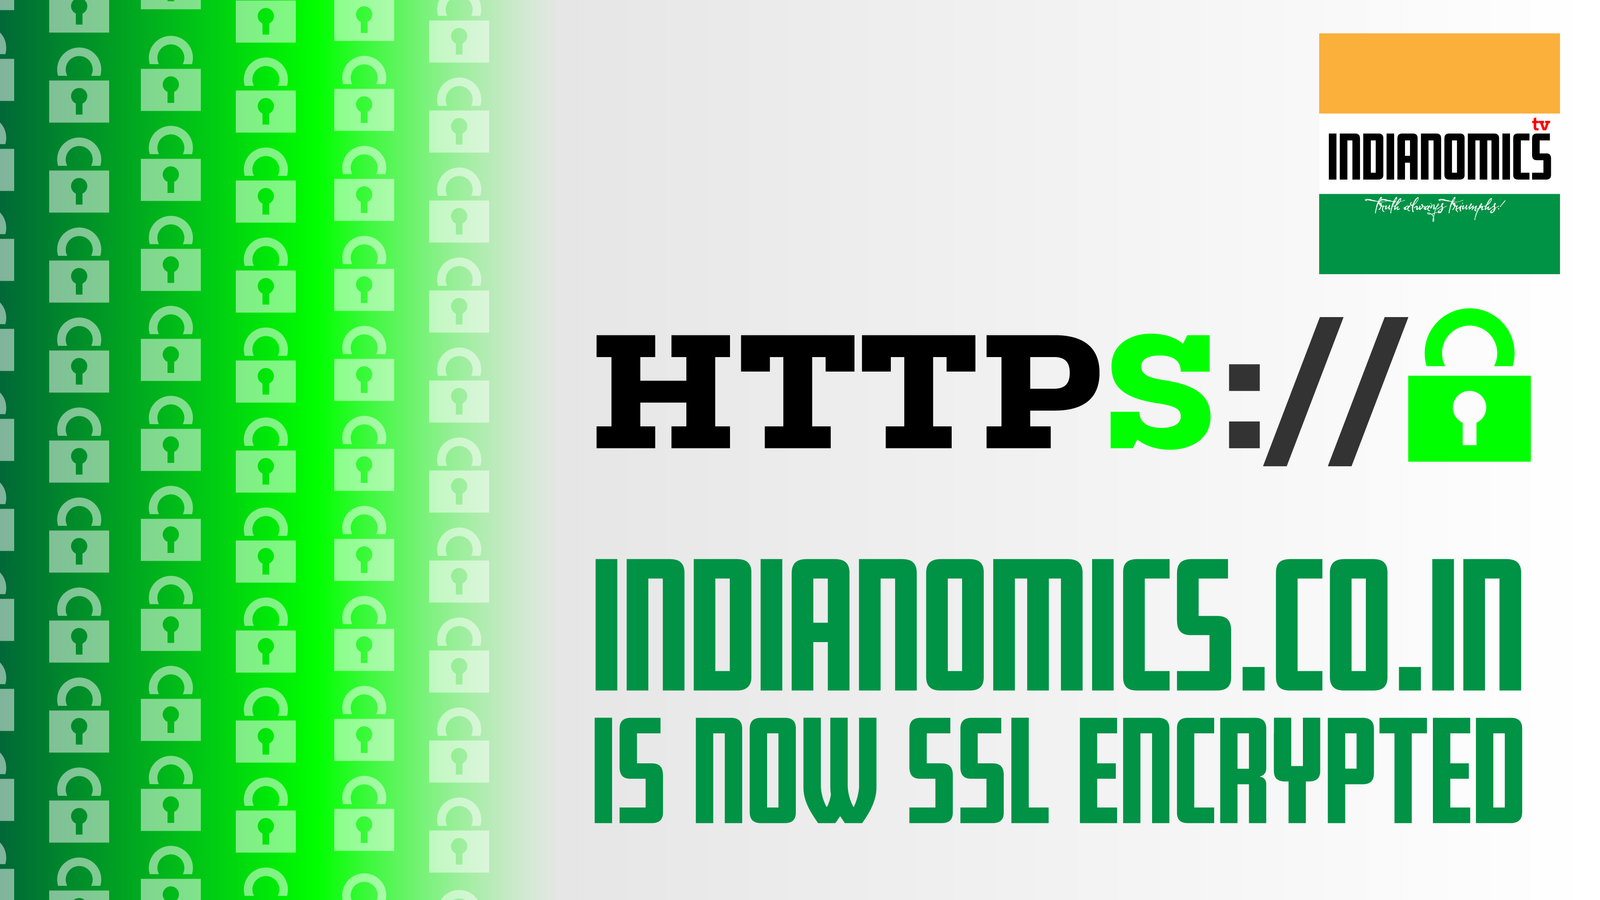 Indianomics is now SSL Encrypted